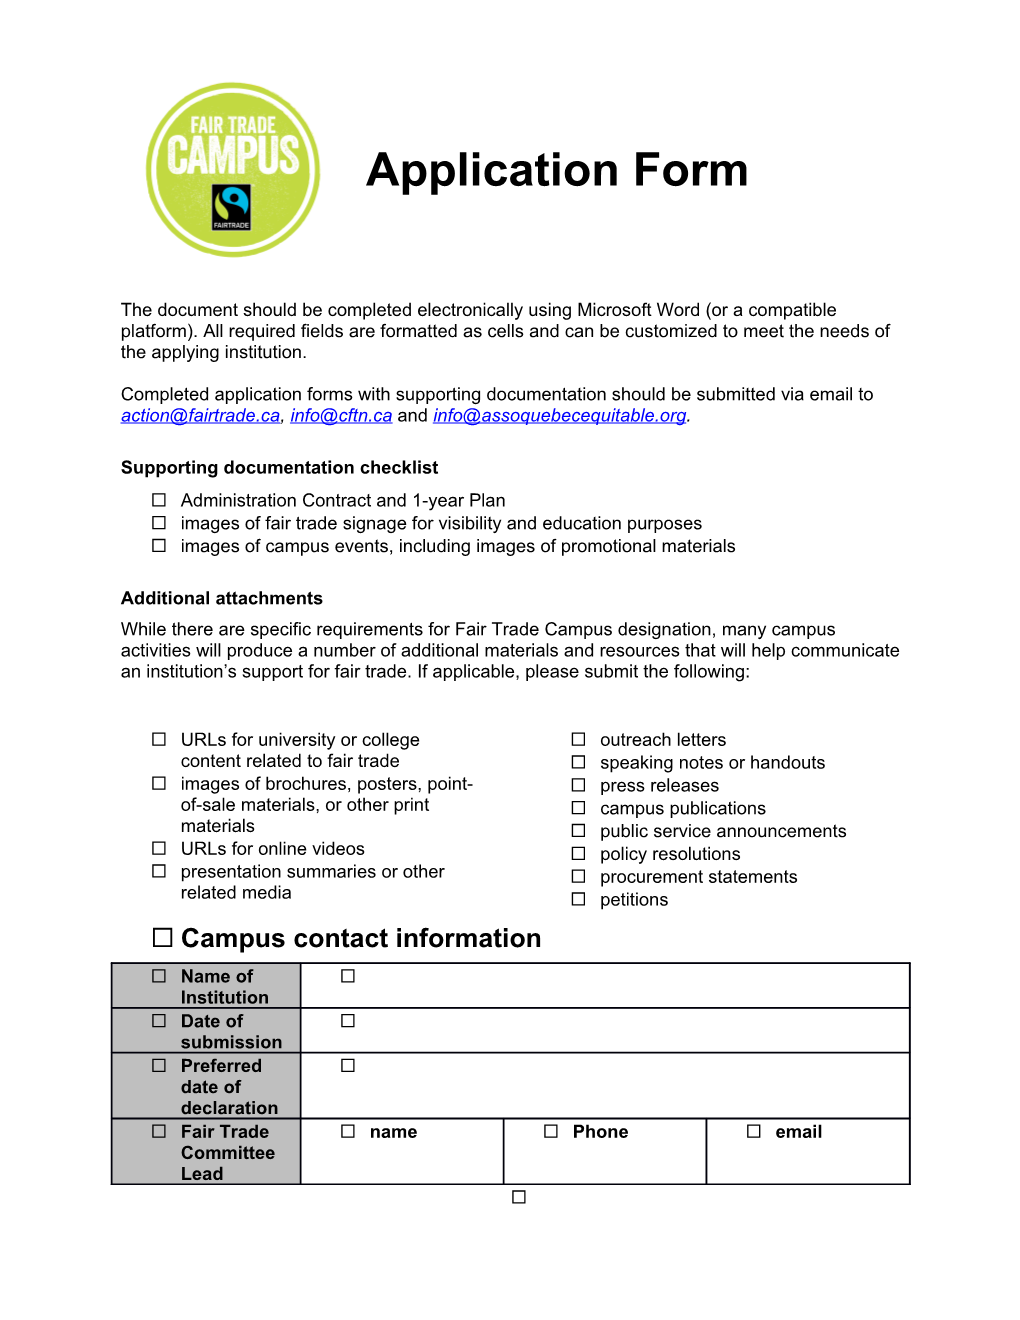 Completed Application Forms with Supporting Documentation Should Be Submitted Via Email